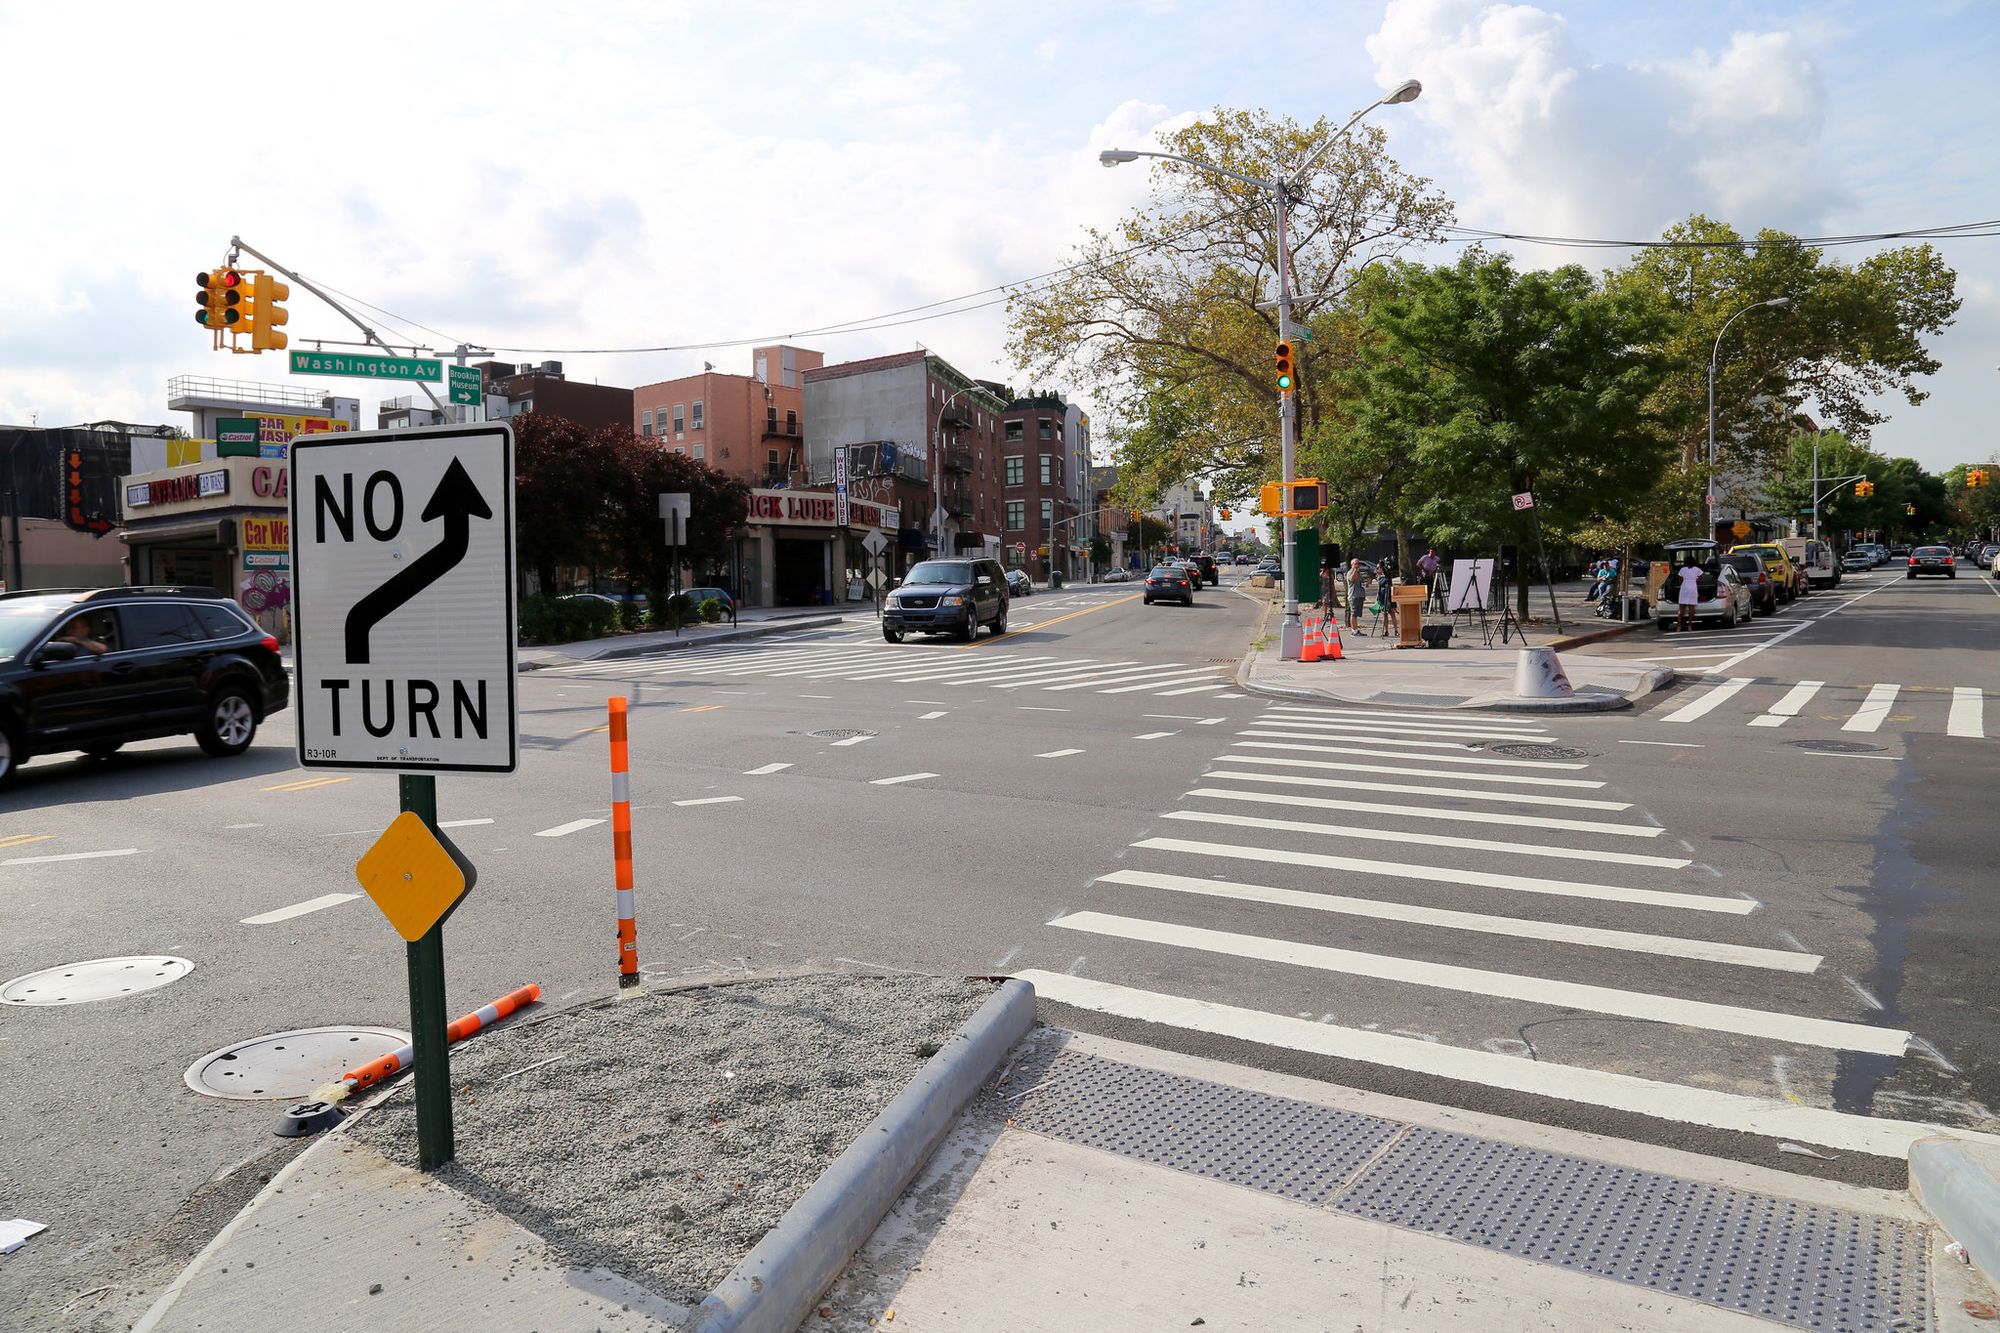 Shortened Crosswalks, Left-Turn Signals, And More Pedestrian Safety Changes Come To Clinton Hill Intersection